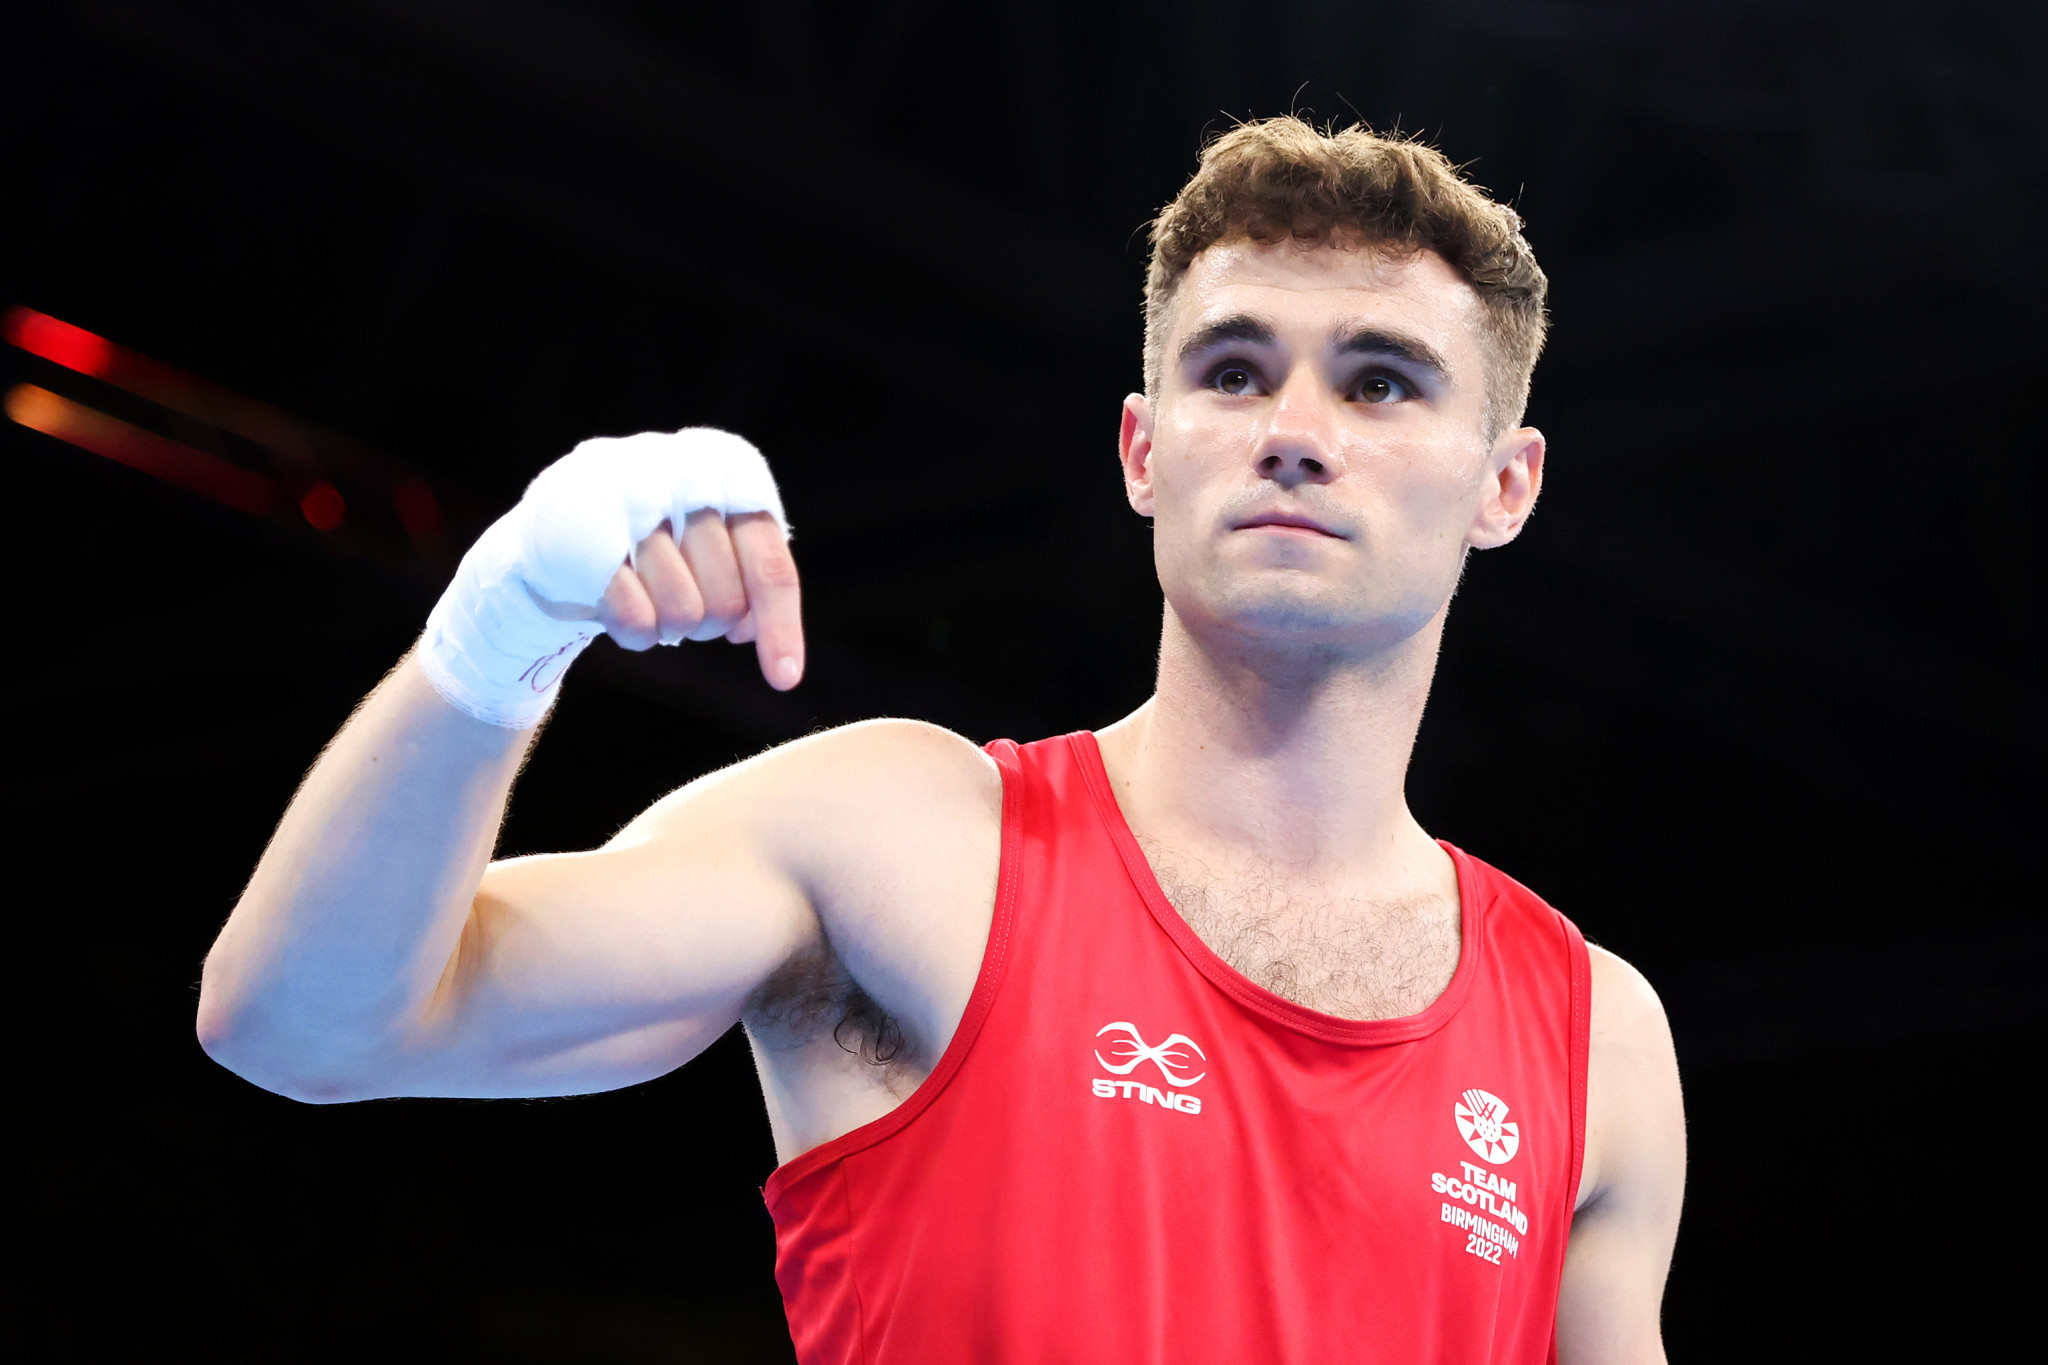 Tyler Jolly of Scotland knocked out his opponent, sending himself into the quarter-finals of the men's under-67kg boxing ©Getty Images